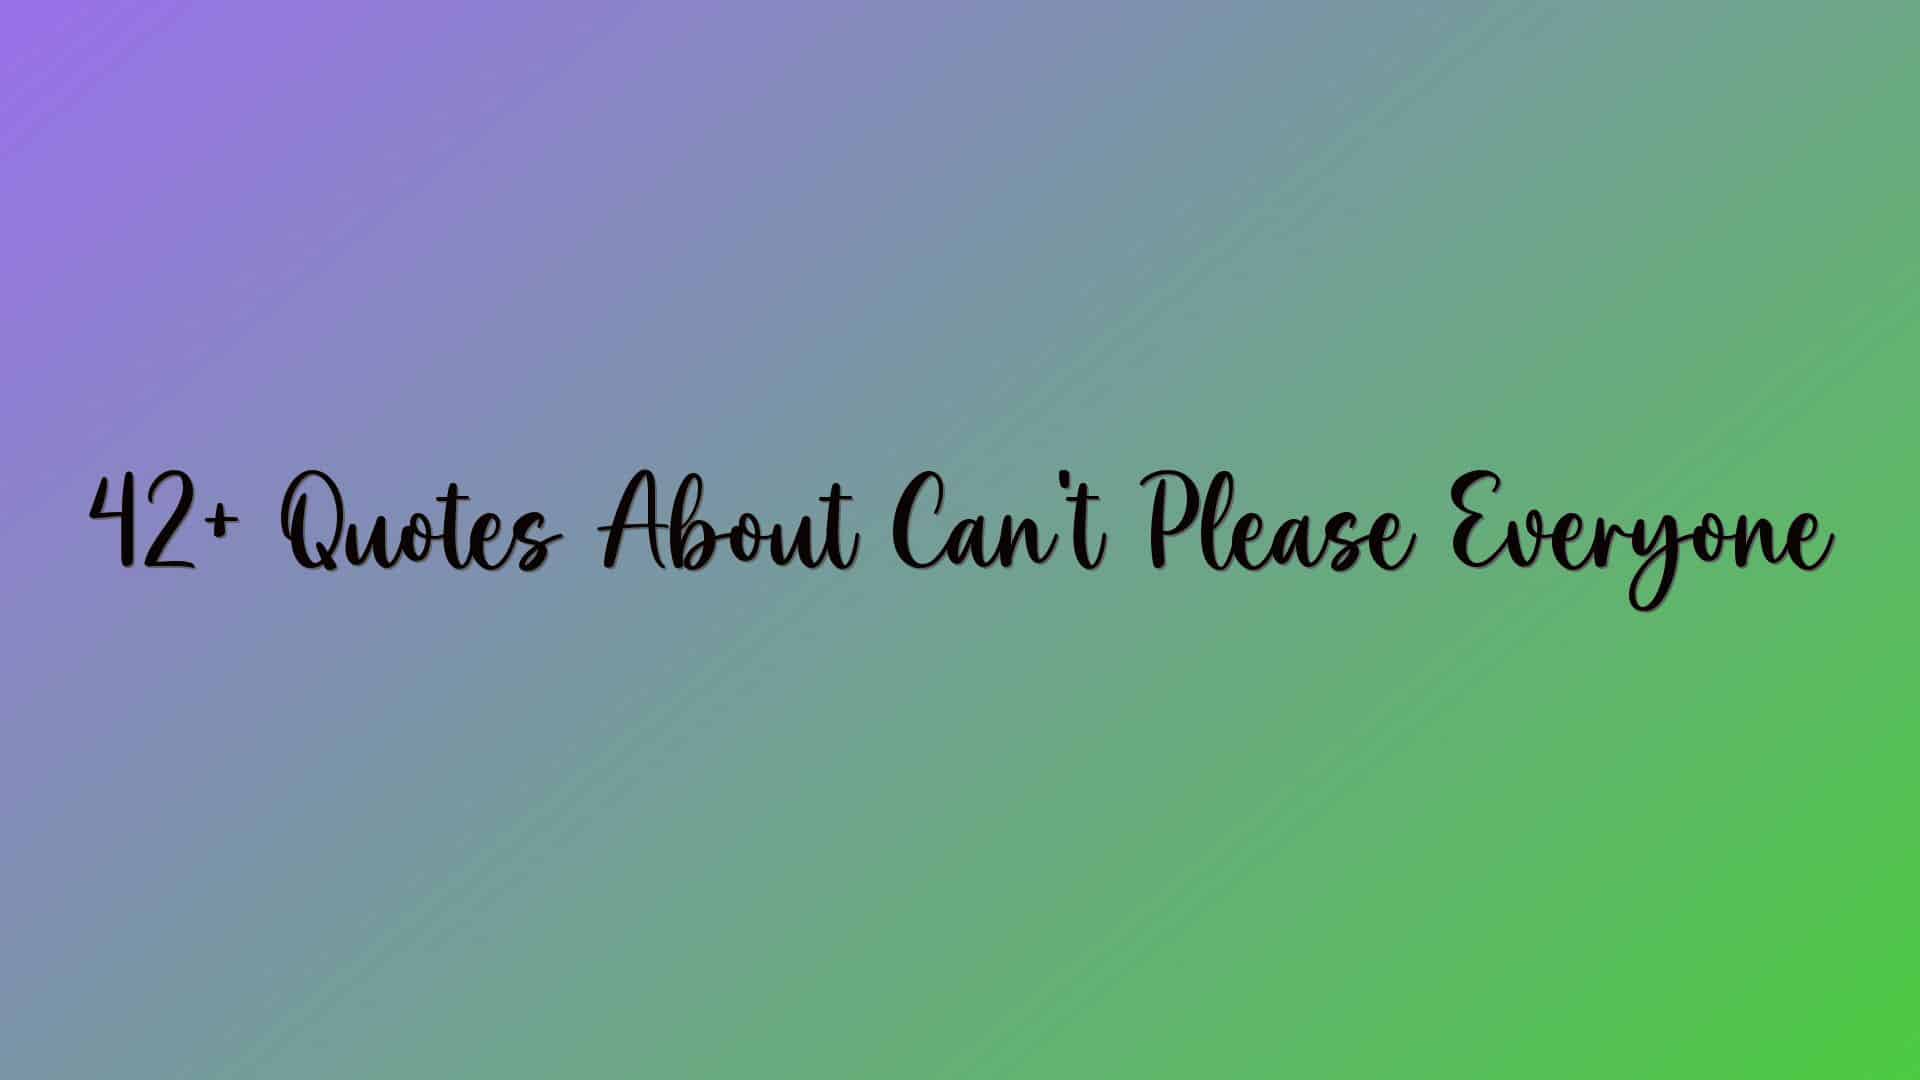 42+ Quotes About Can’t Please Everyone